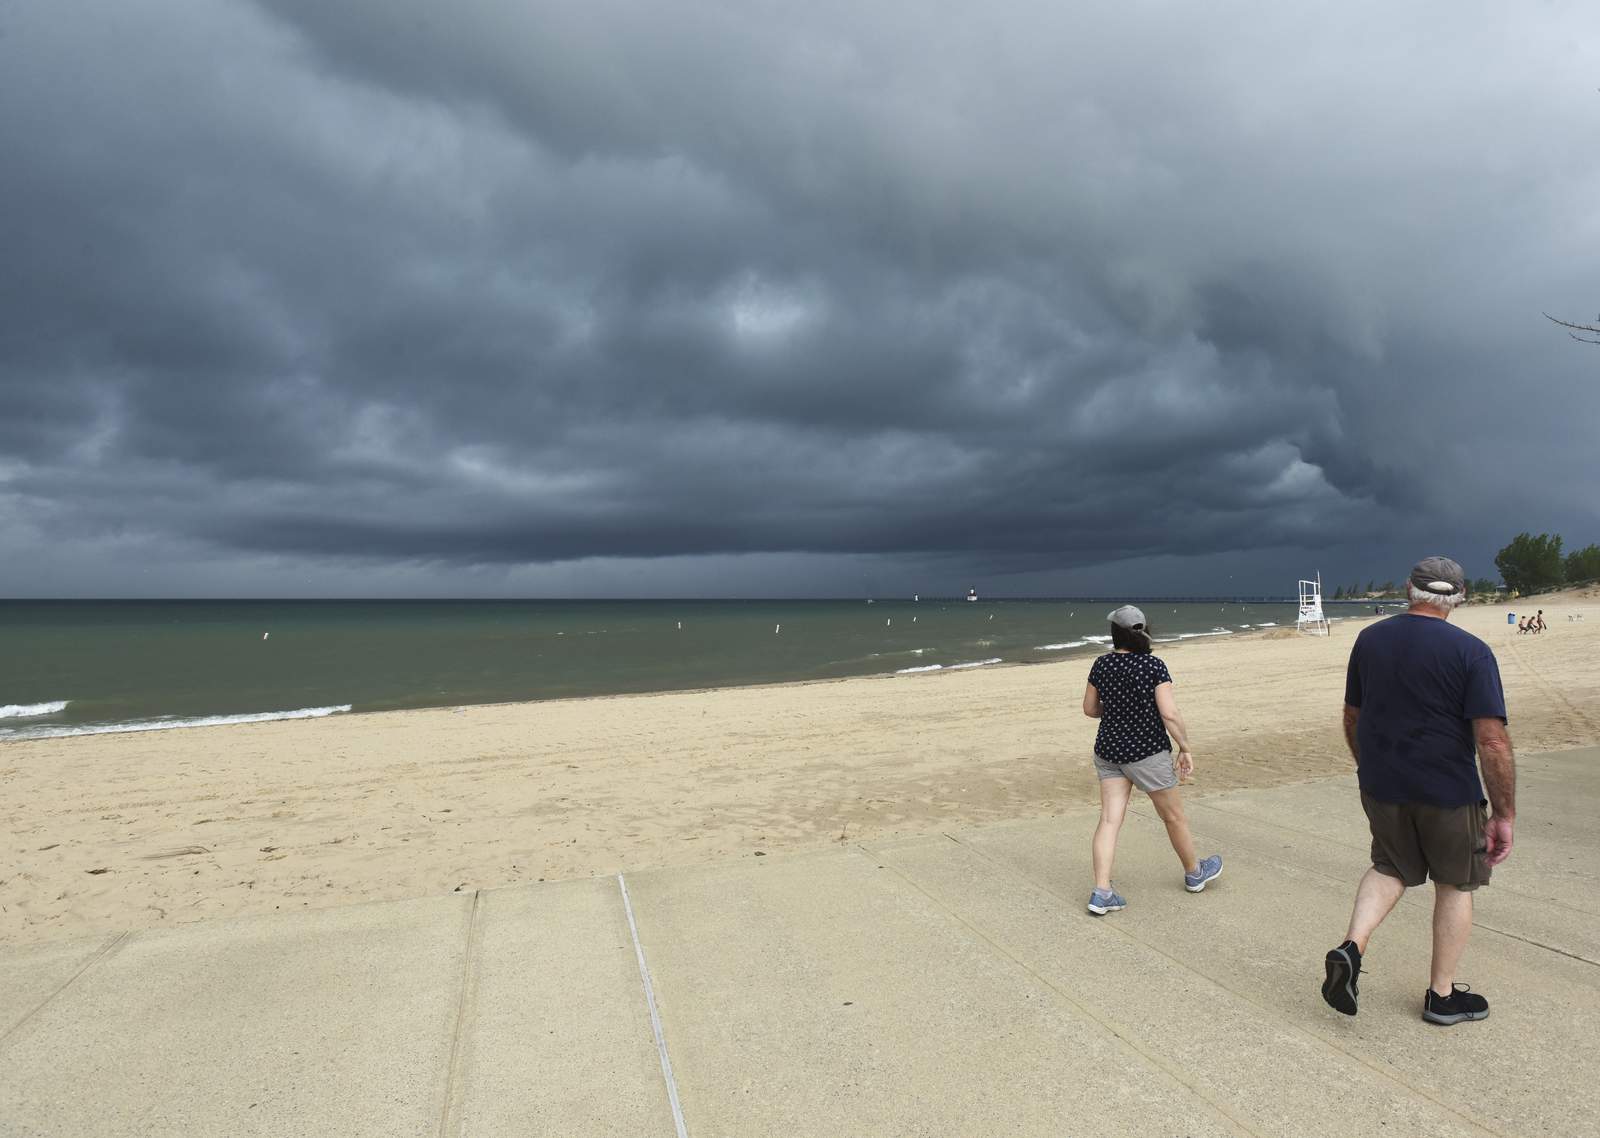 Swimming advisories extended for parts of Lake Michigan